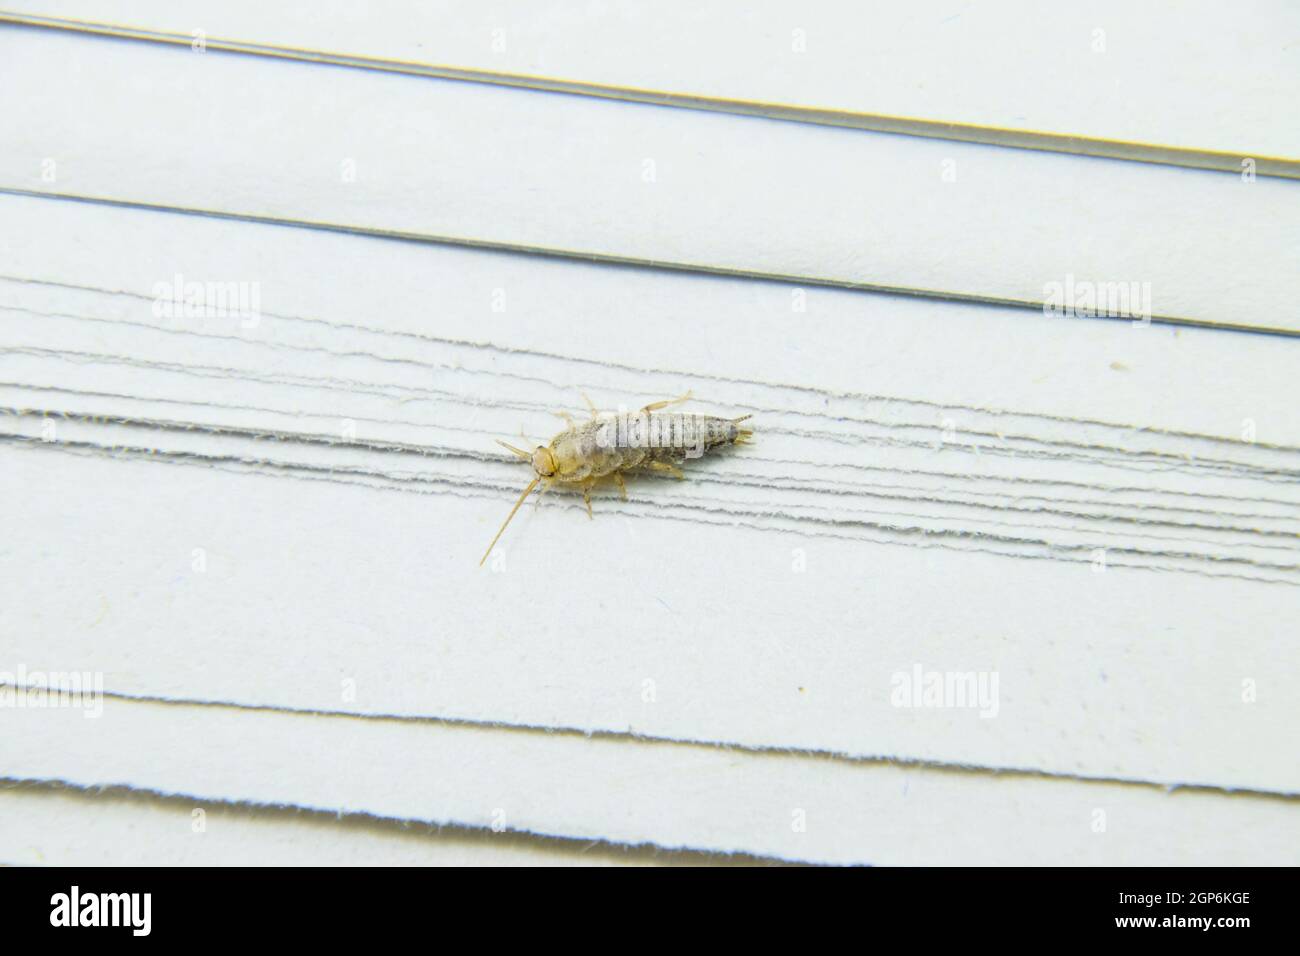 Insect feeding on paper - silverfish. Pest books and newspapers. Stock Photo